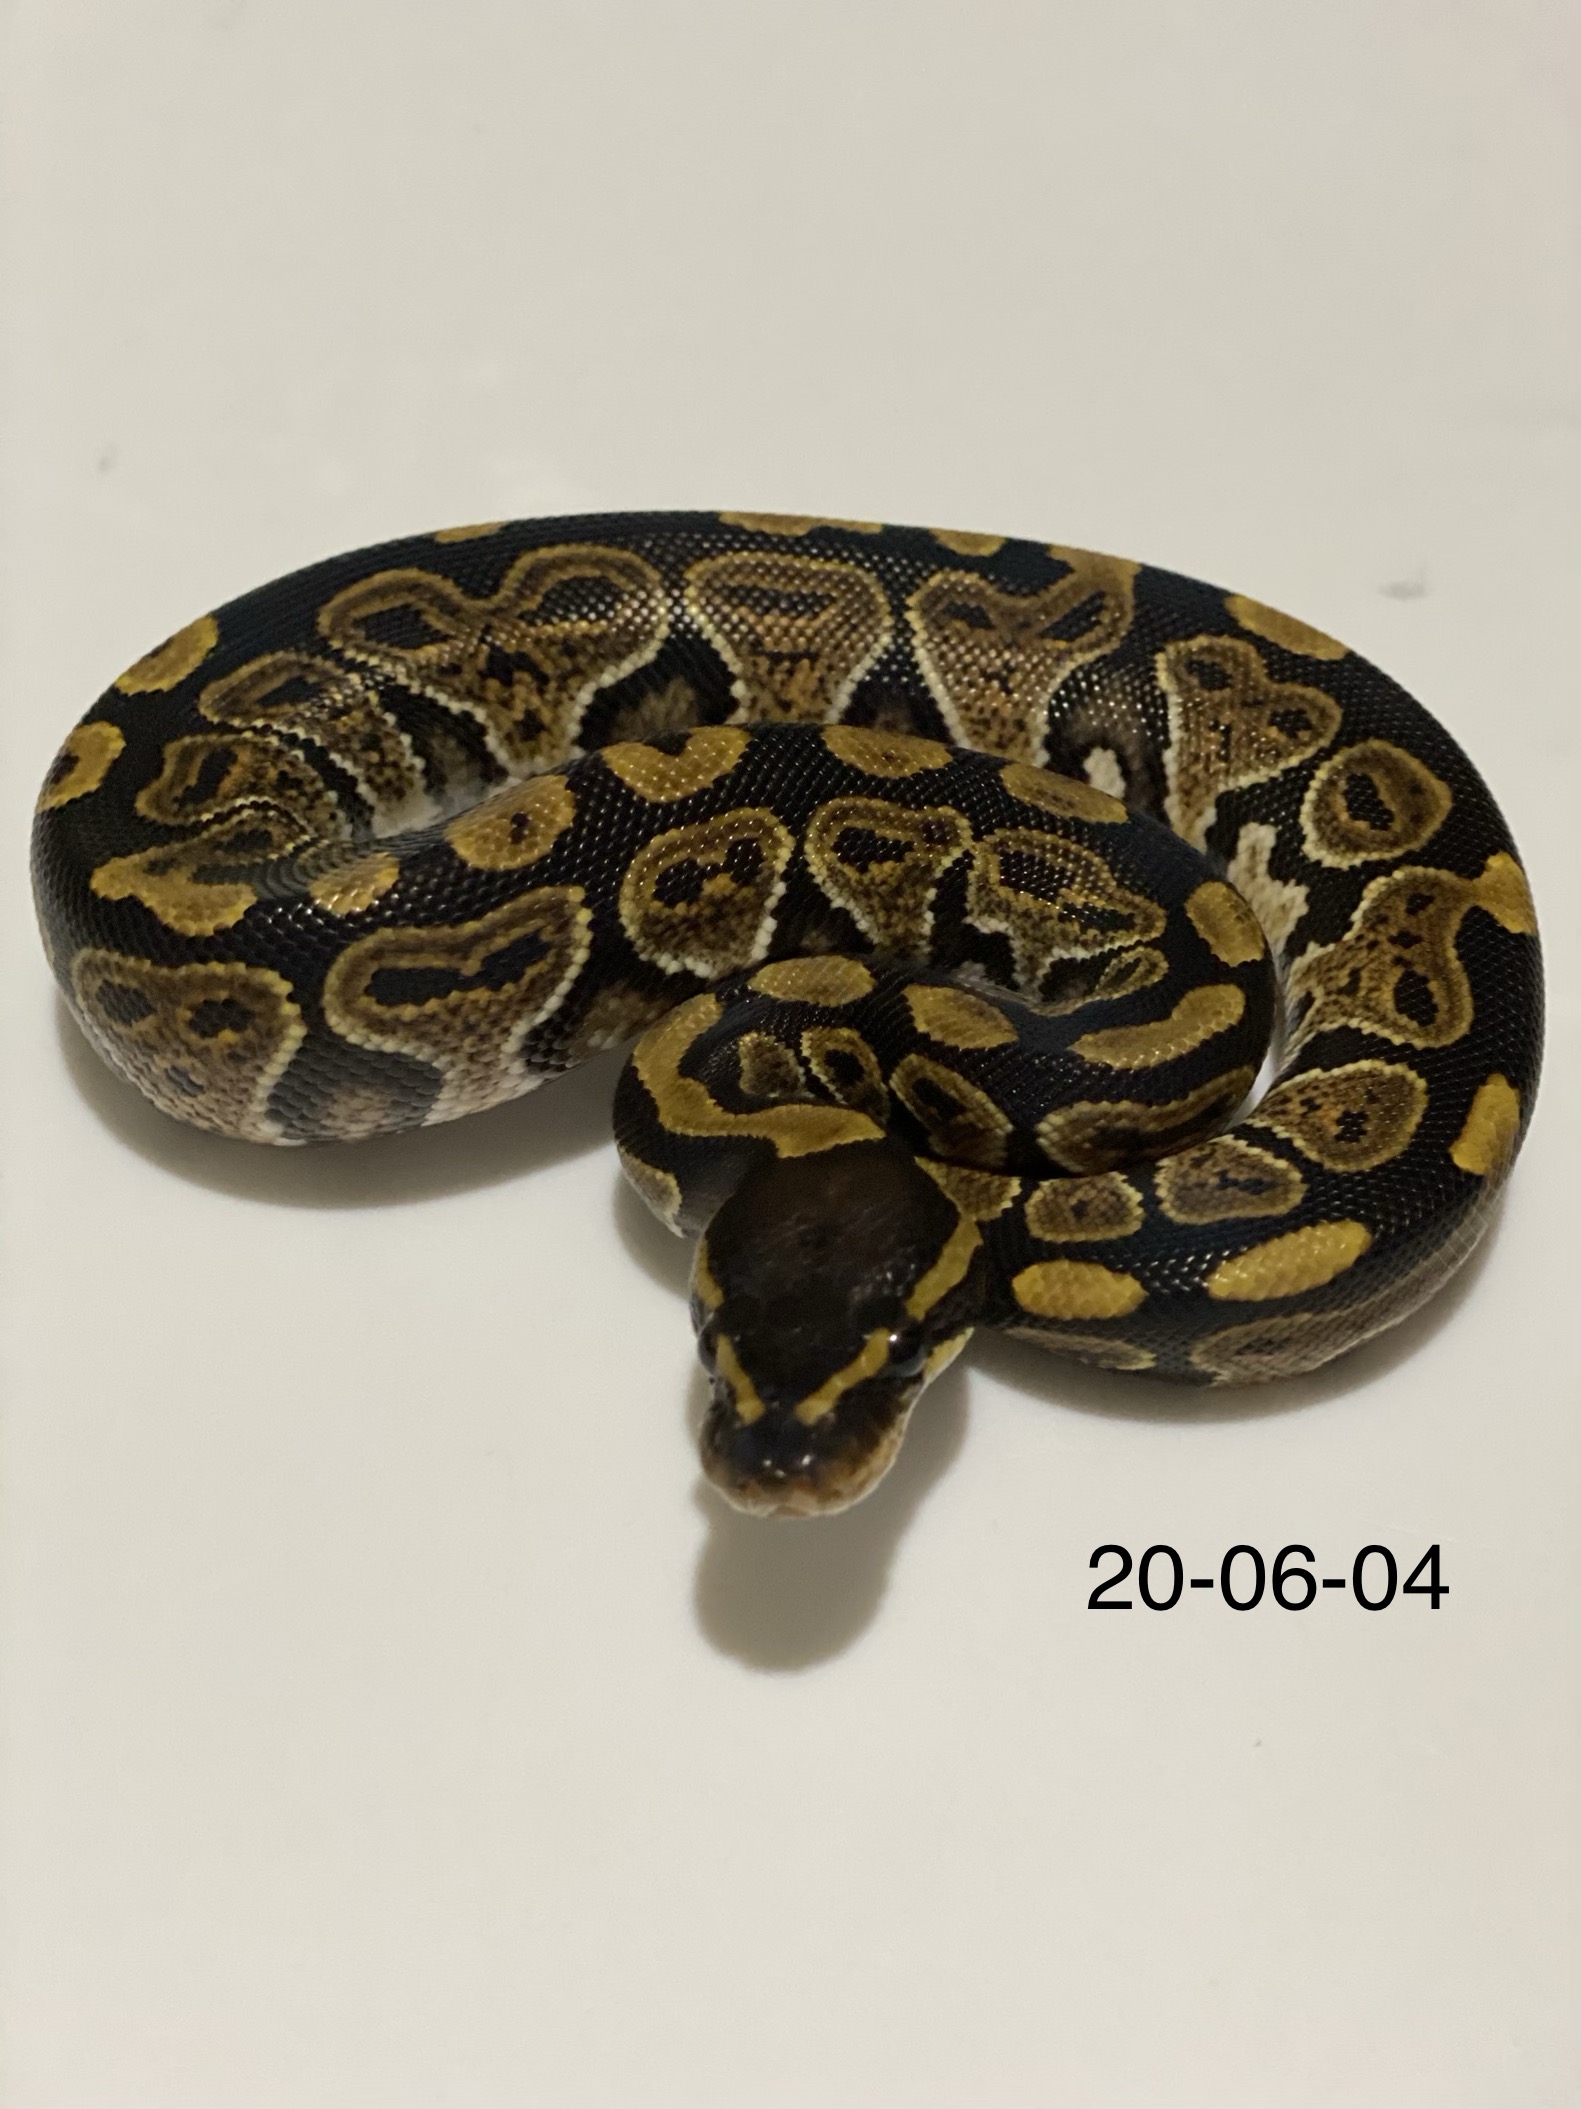 Quake Ball Python by From The Darkside